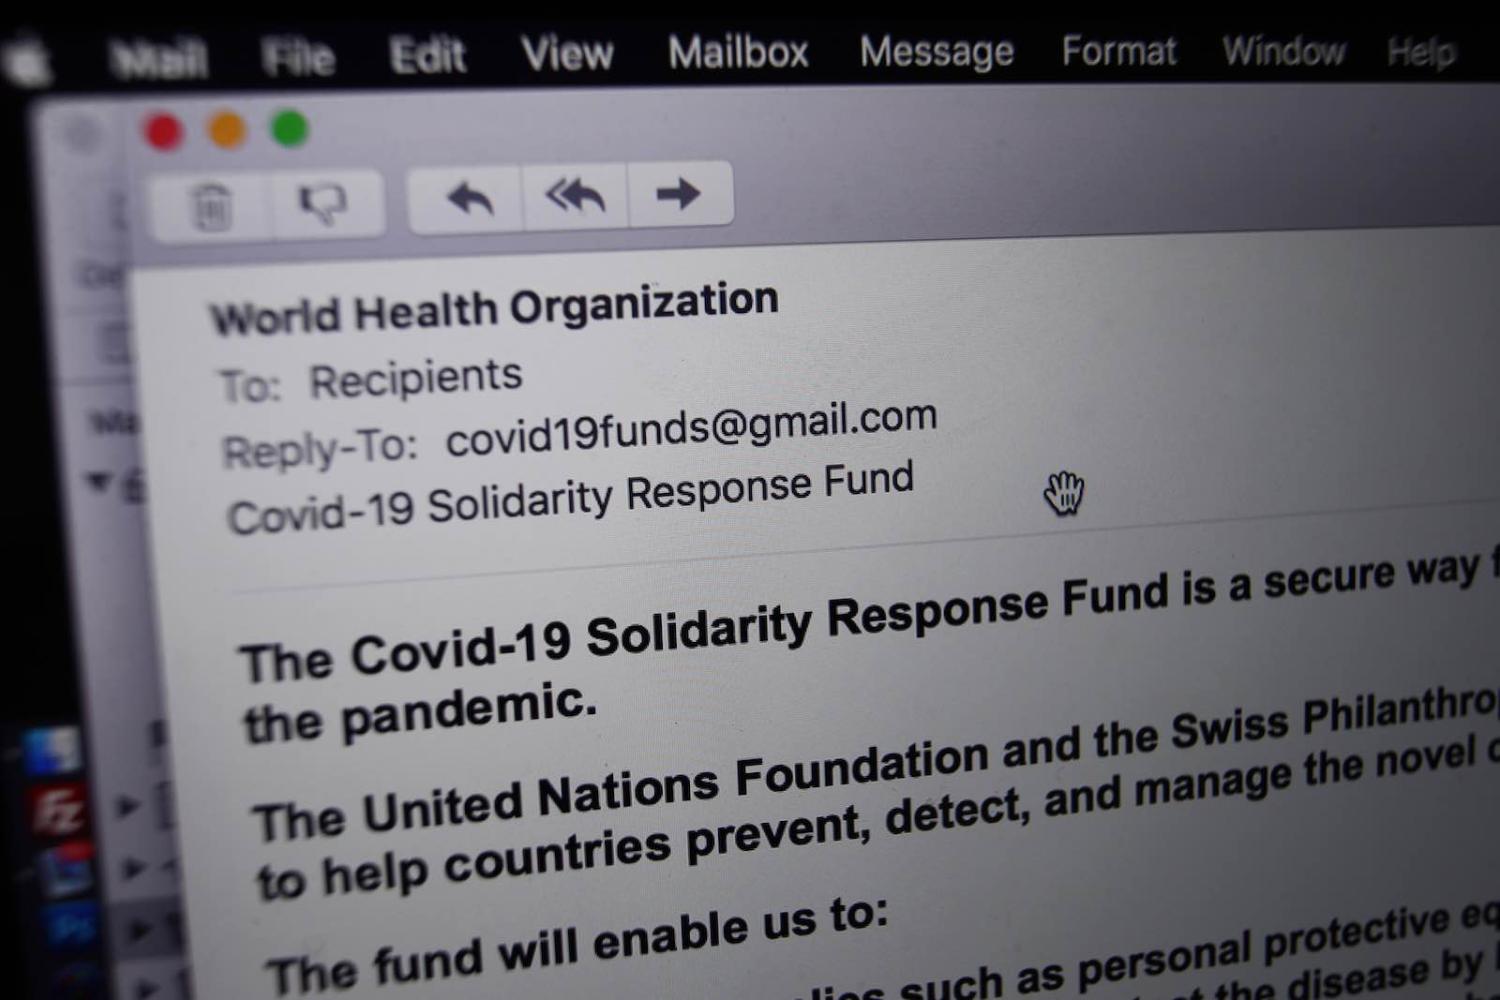 A phishing email from someone posing as the head of the World Health Organisation asking recipients to donate money to a coronavirus fund, received in London (Photo by Yui Mok/PA Images via Getty Images)